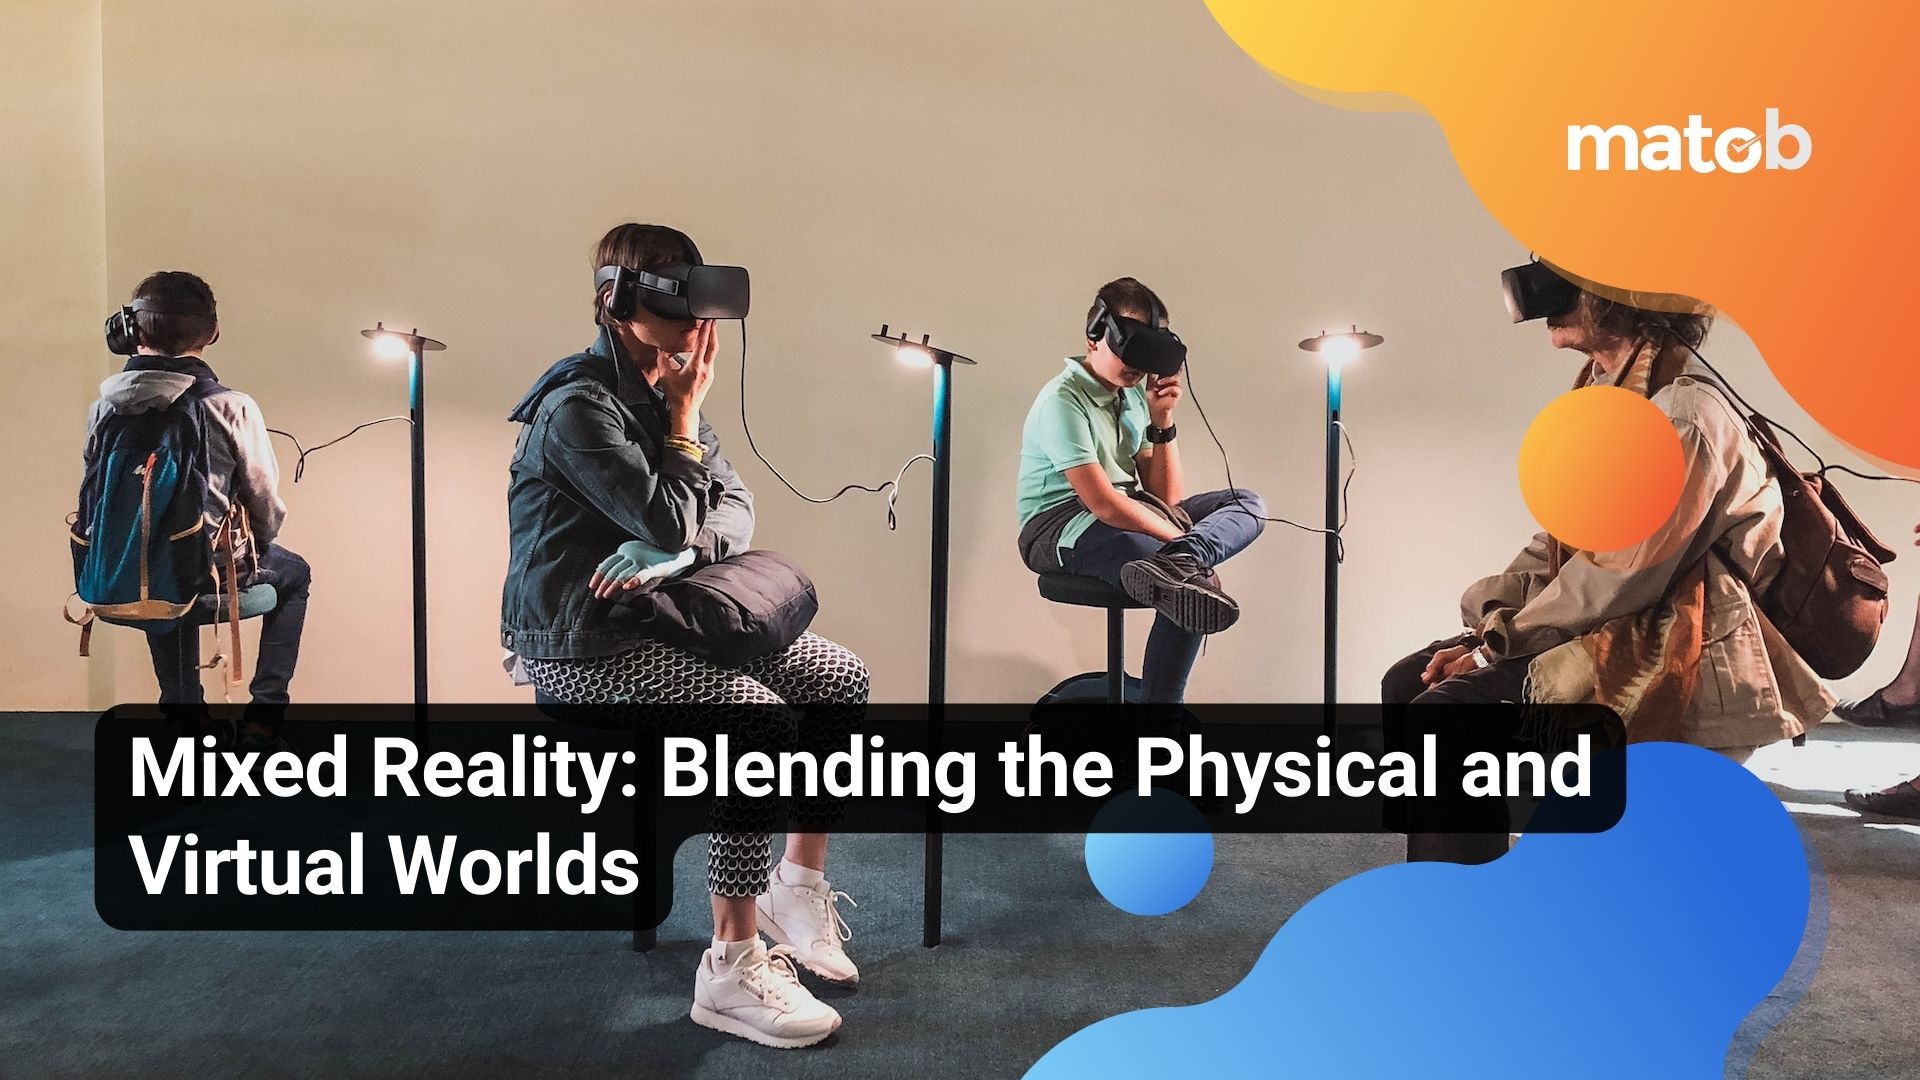 Mixed Reality: Blending the Physical and Virtual Worlds